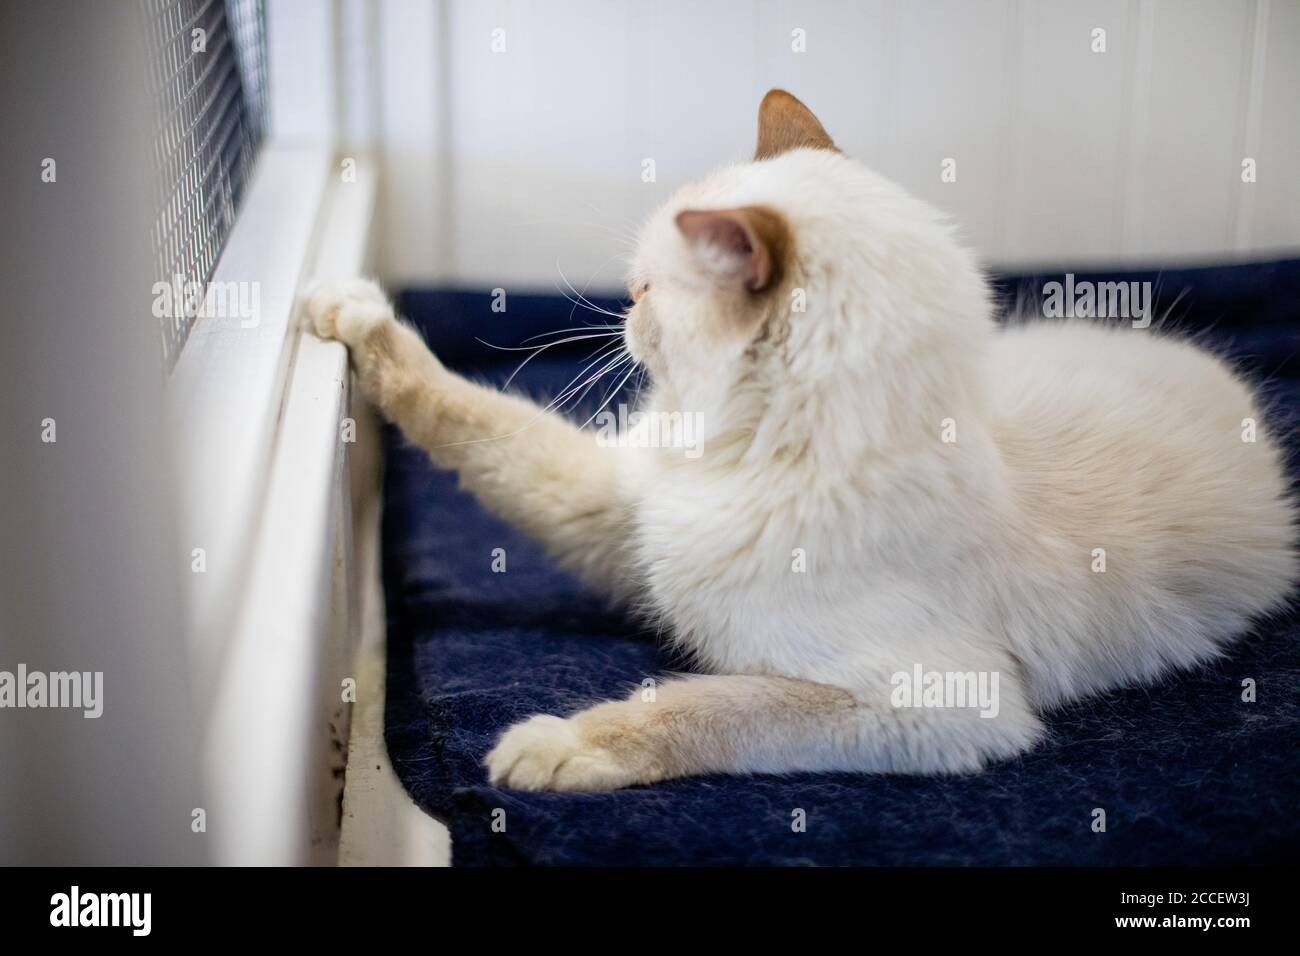 White Cat Reaches Towards a Kennel Window Stock Photo